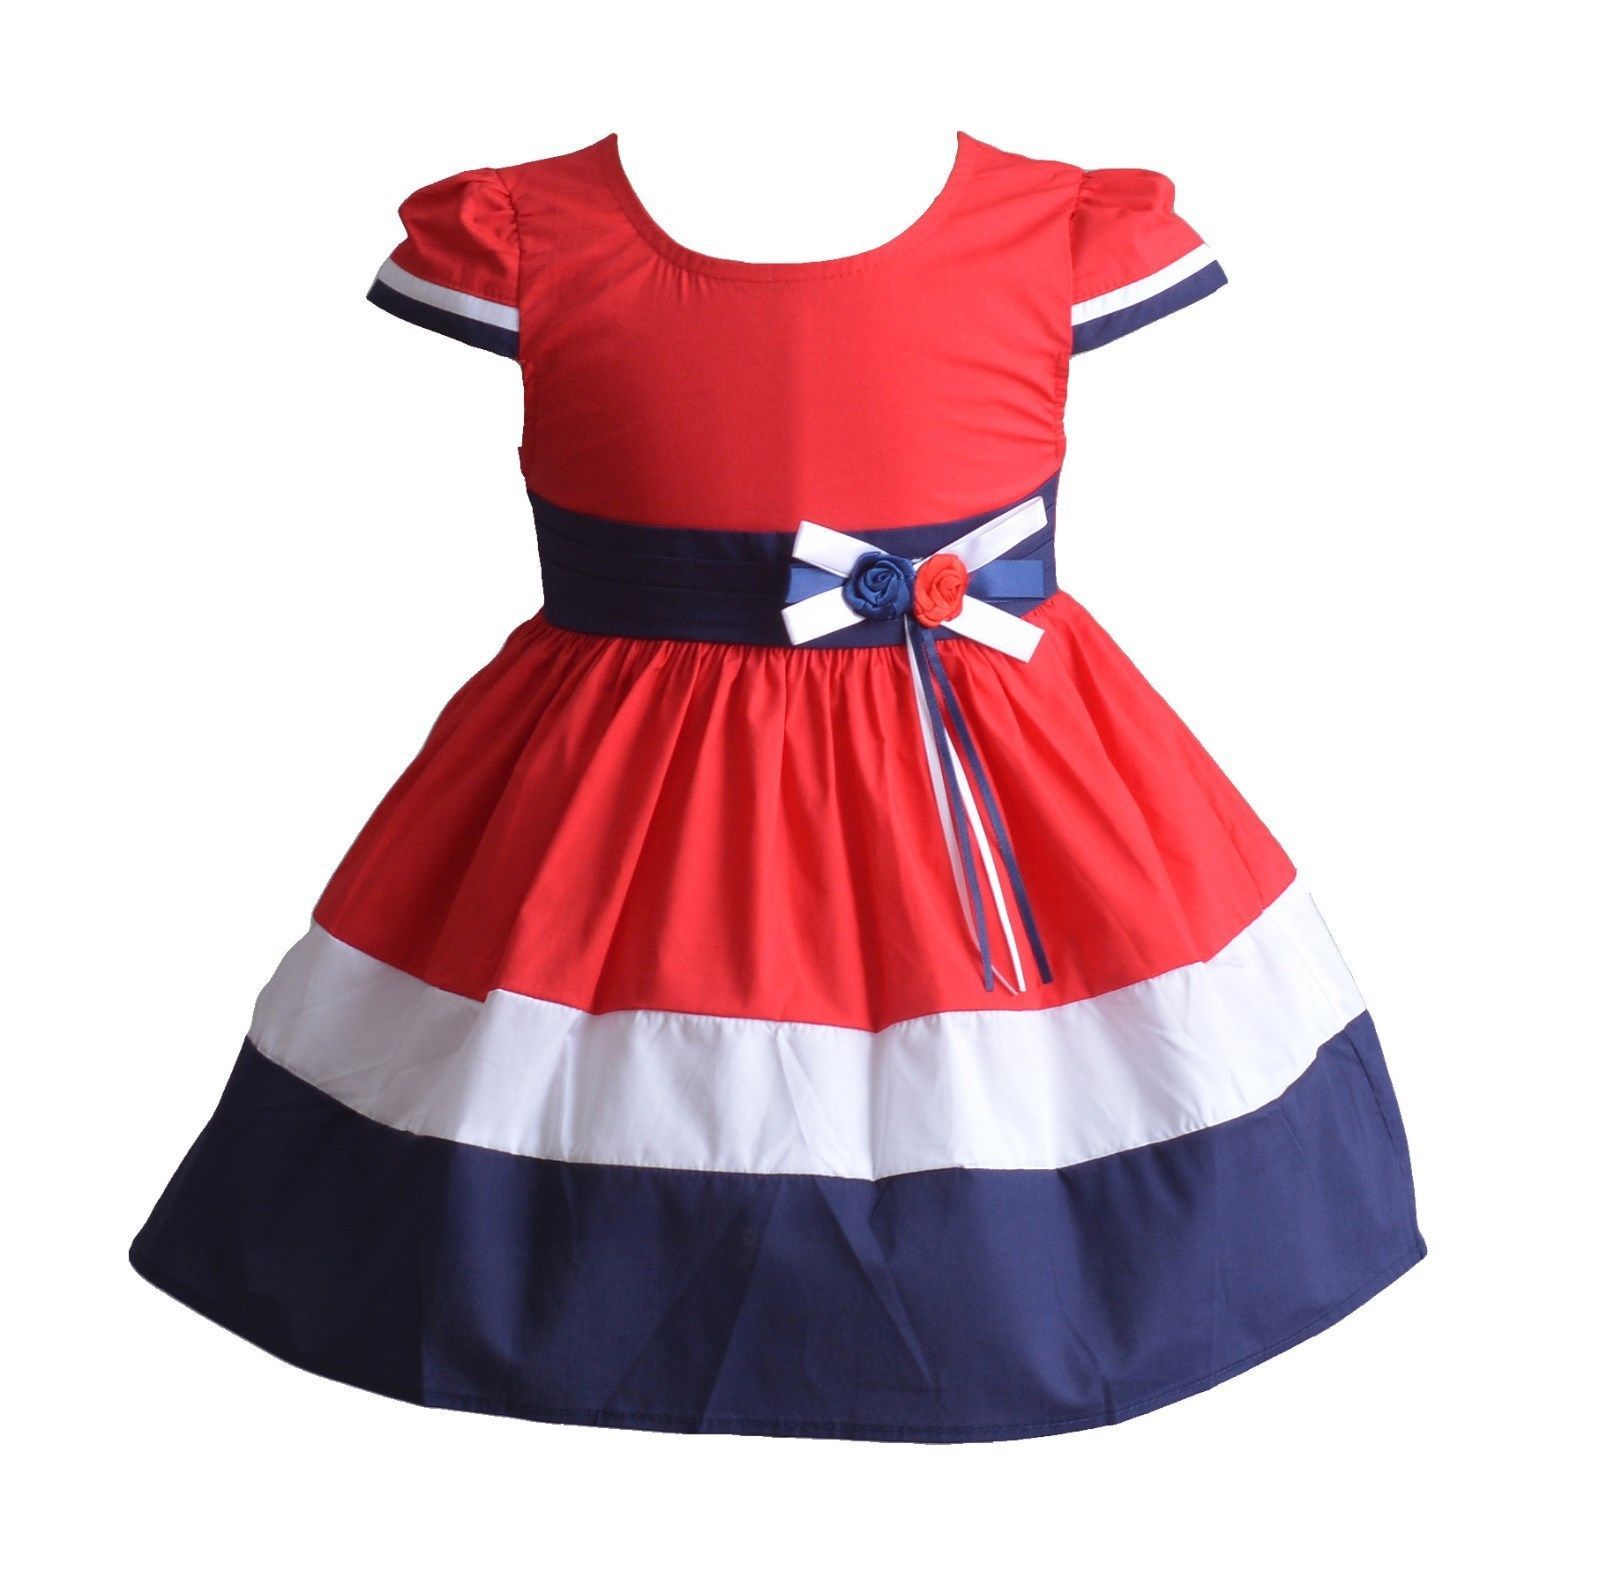 Girls Flower Cotton Summer Party Dress Blue Red 4 5 6 7 8 Years 